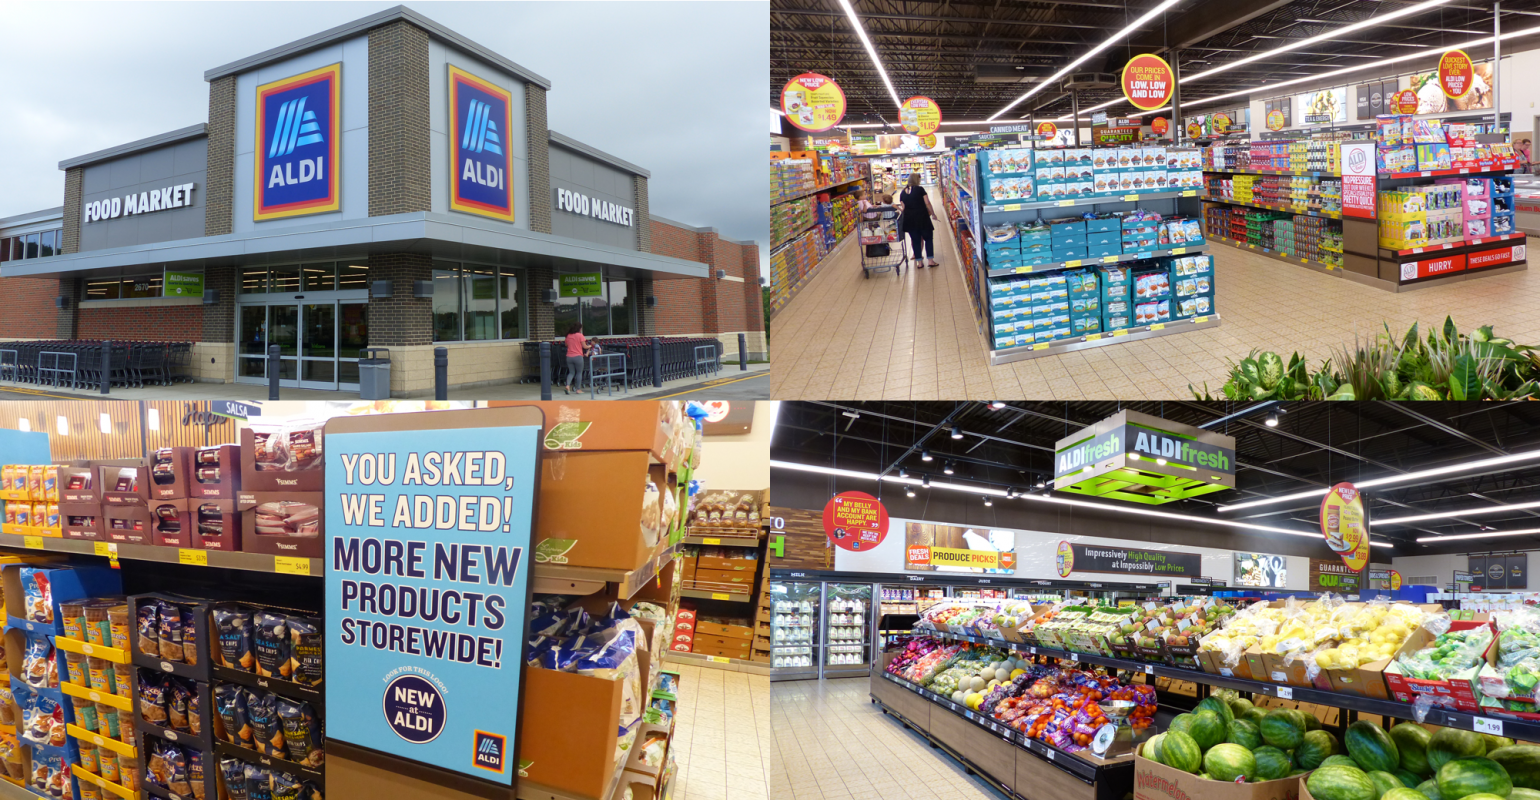 Sillón Arquitectura Producción Aldi ups the ante with store, product expansions | Supermarket News